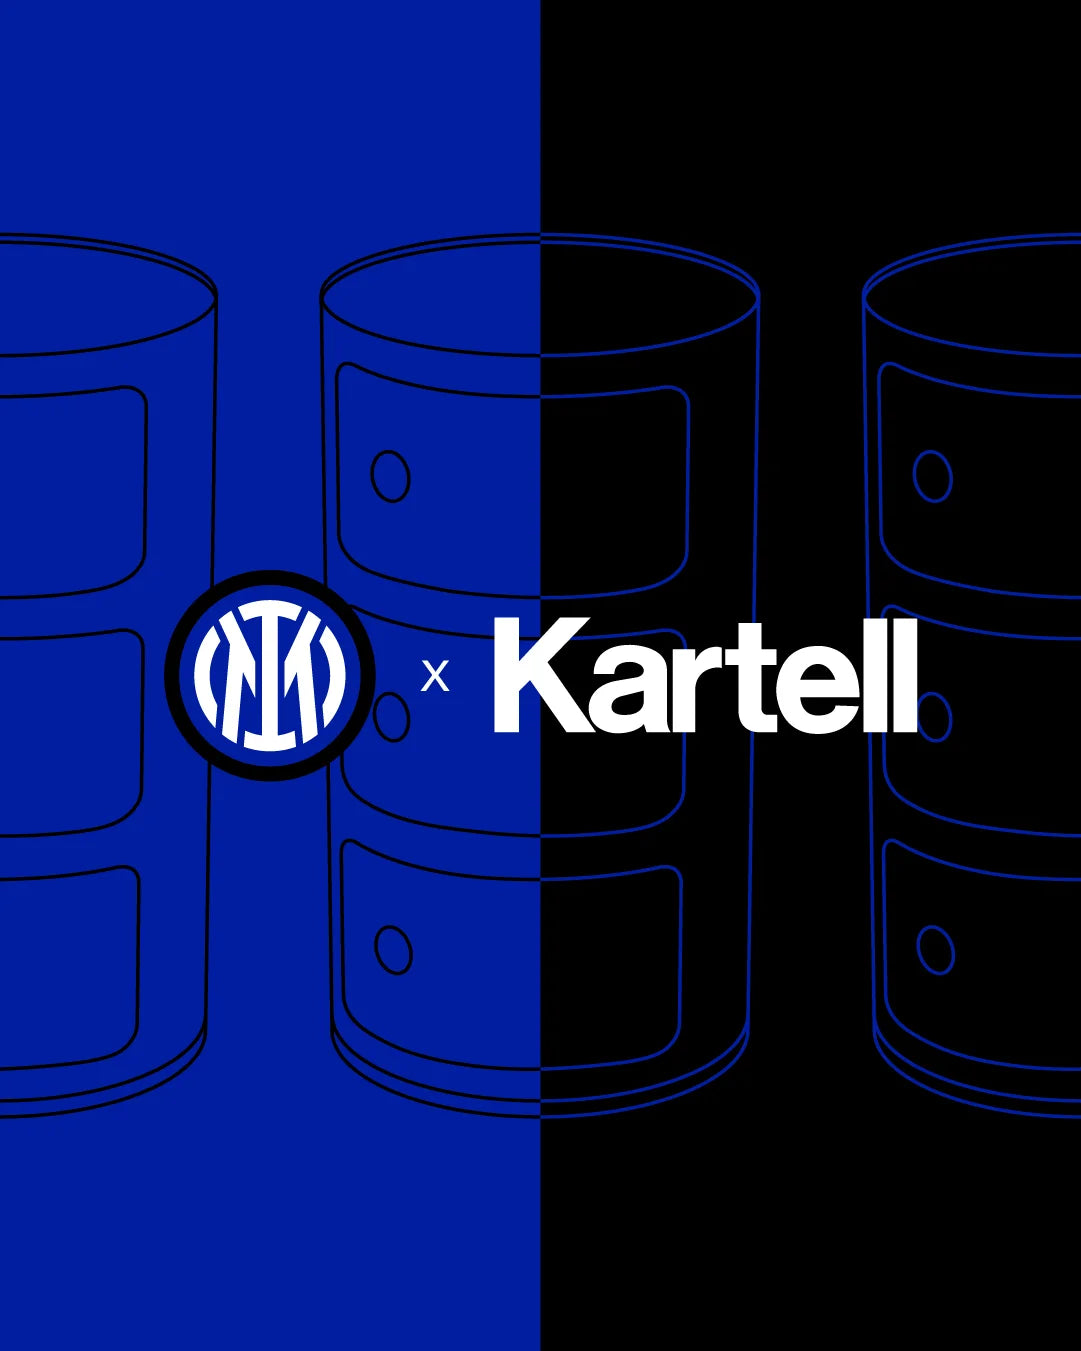 Kartell Componibili Classic Container 3 Elemente, Silber